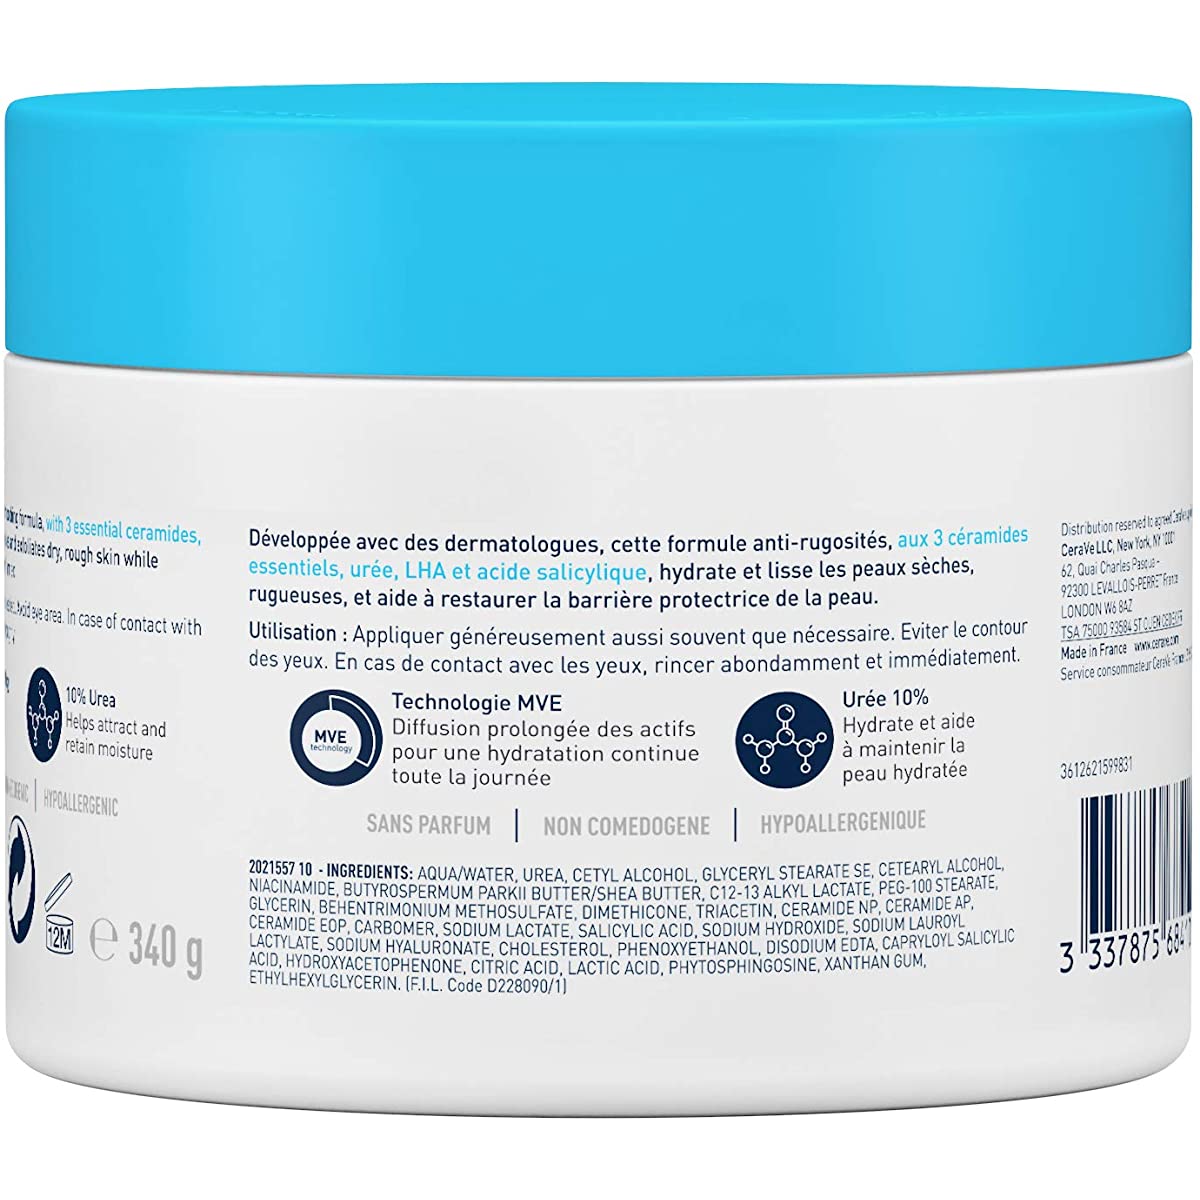 CeraVe SA Smoothing Cream for Dry, Rough, Bumpy Skin (12 OZ/340 g) CeraVe